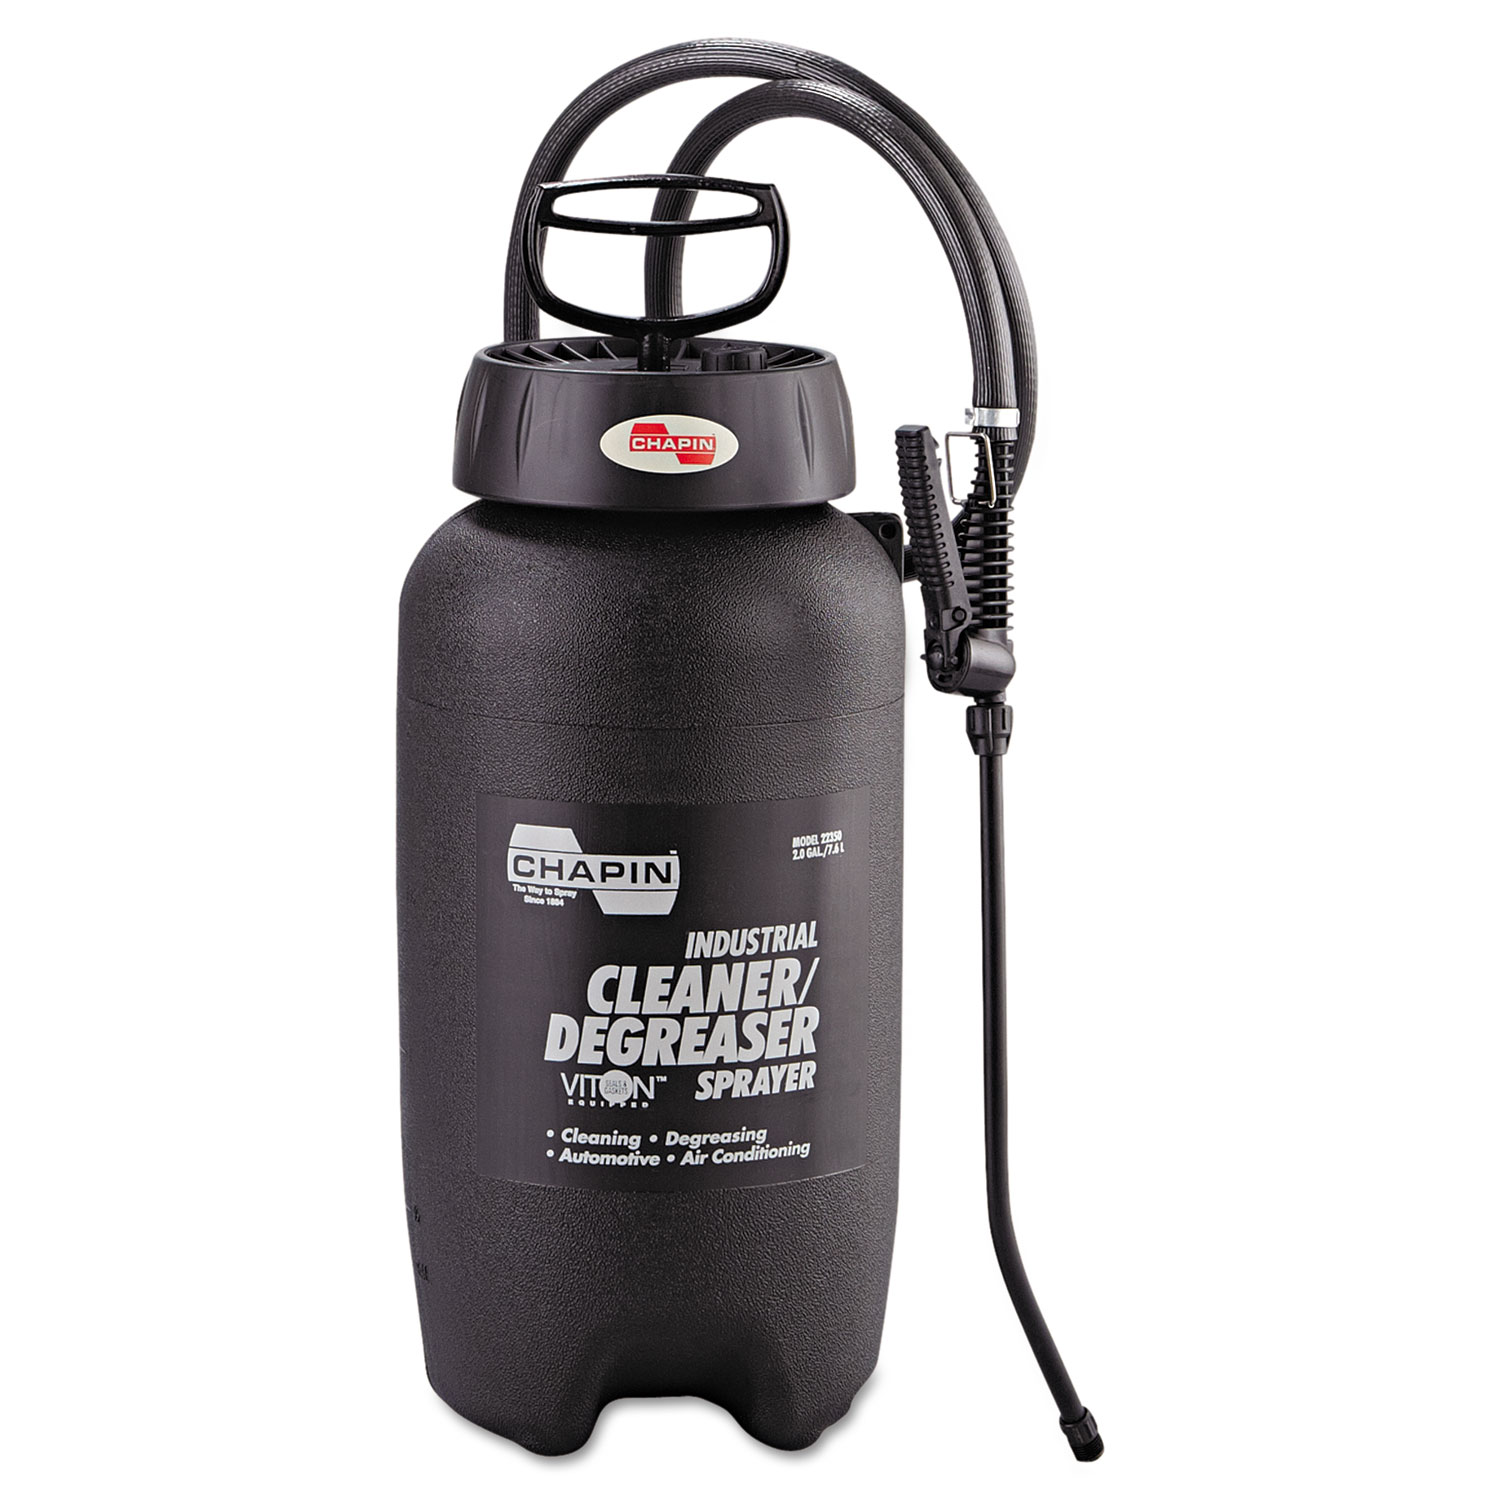  Chapin 22350 Cleaner/Degreaser Sprayer, 2gal (CAN22350) 